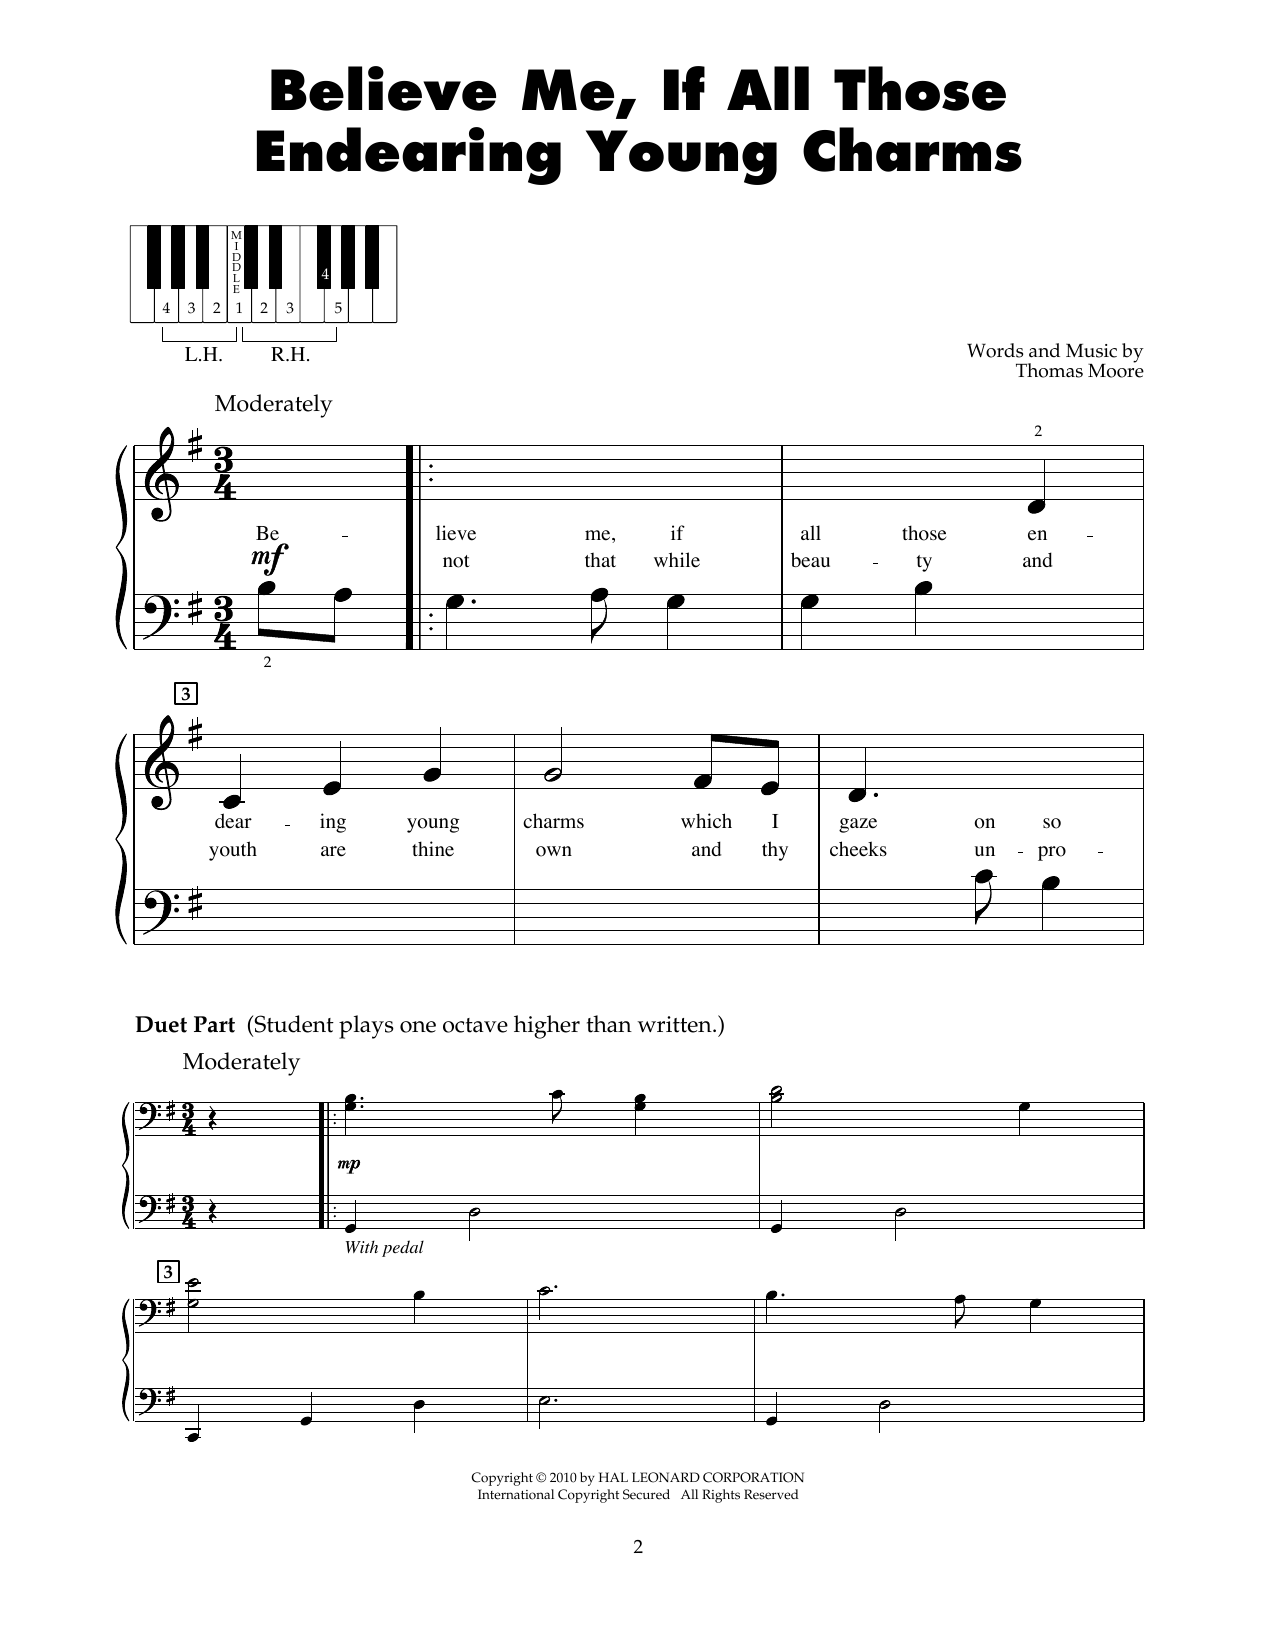 Thomas Moore Believe Me, If All Those Endearing Young Charms sheet music notes printable PDF score